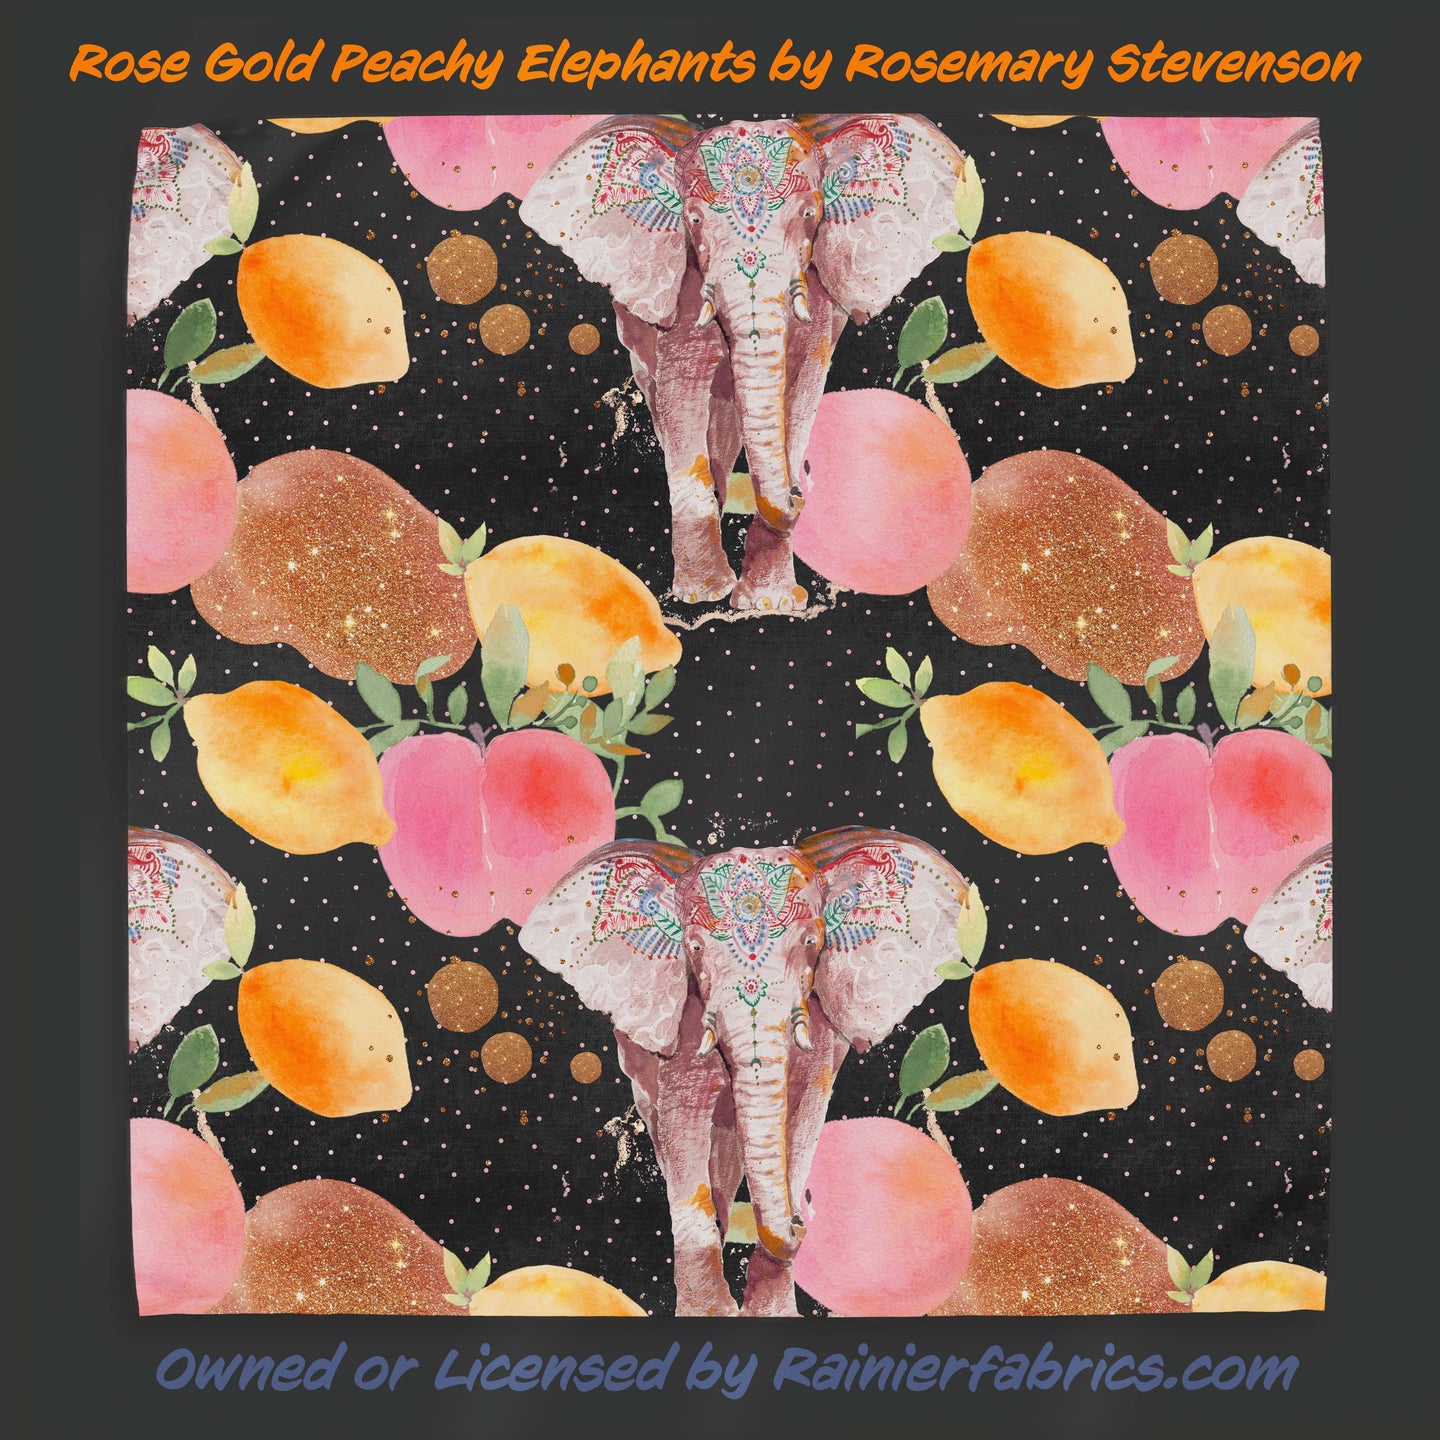 Rose Gold Elephant Peach by Rosemary Stevenson - 2-5 day turnaround - Order by 1/2 yard; Description of bases below